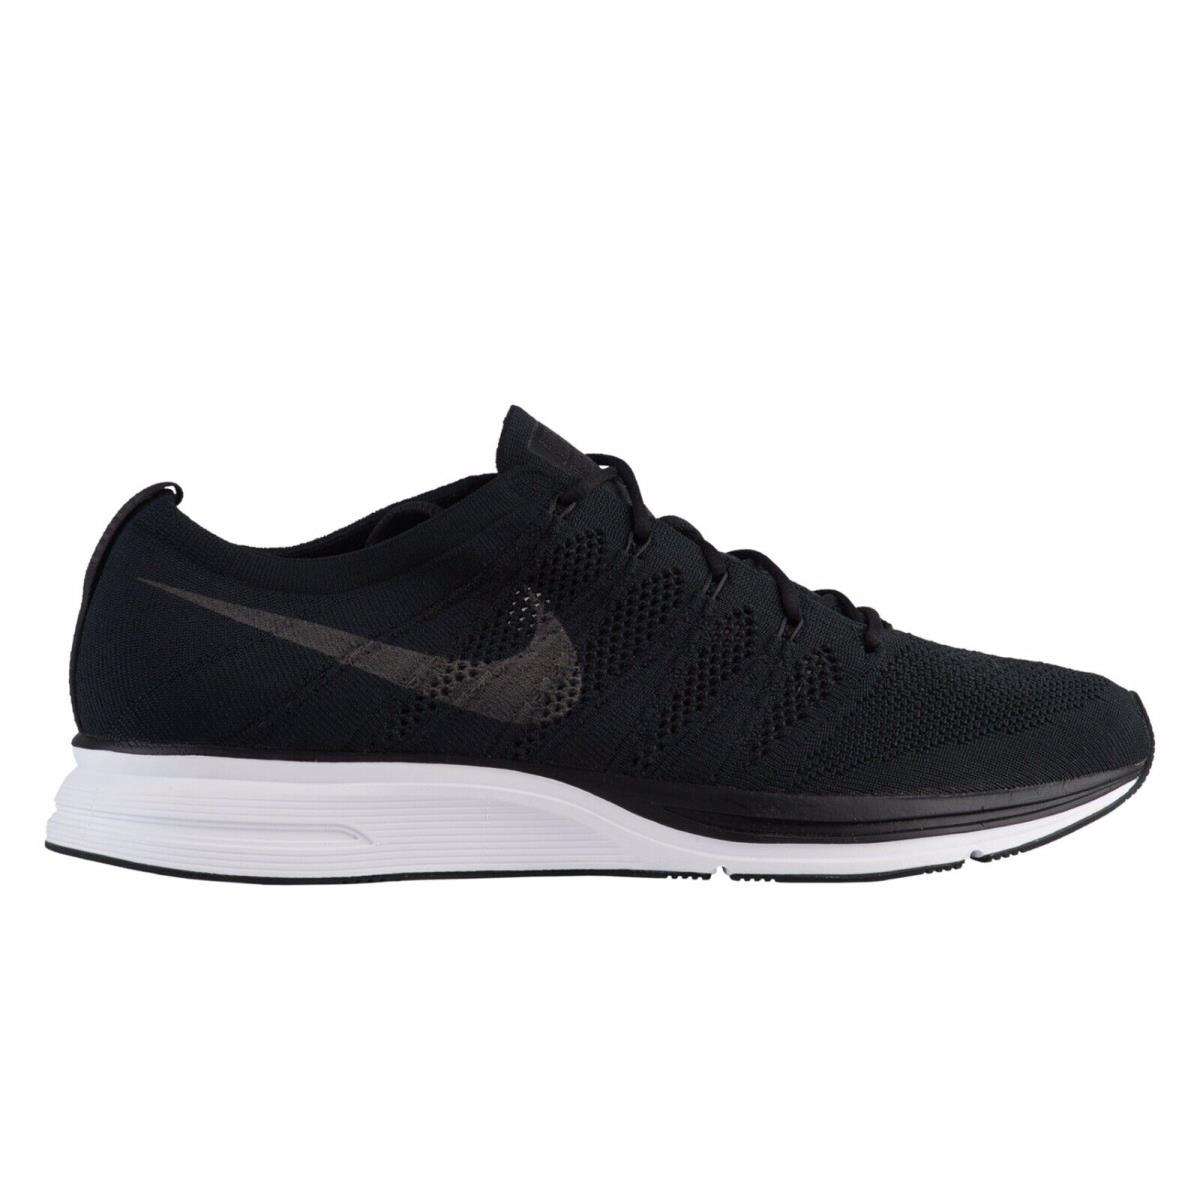 Nike Flyknit Trainer Womens 5.5 Mens 4 Running Trainer Shoes Black